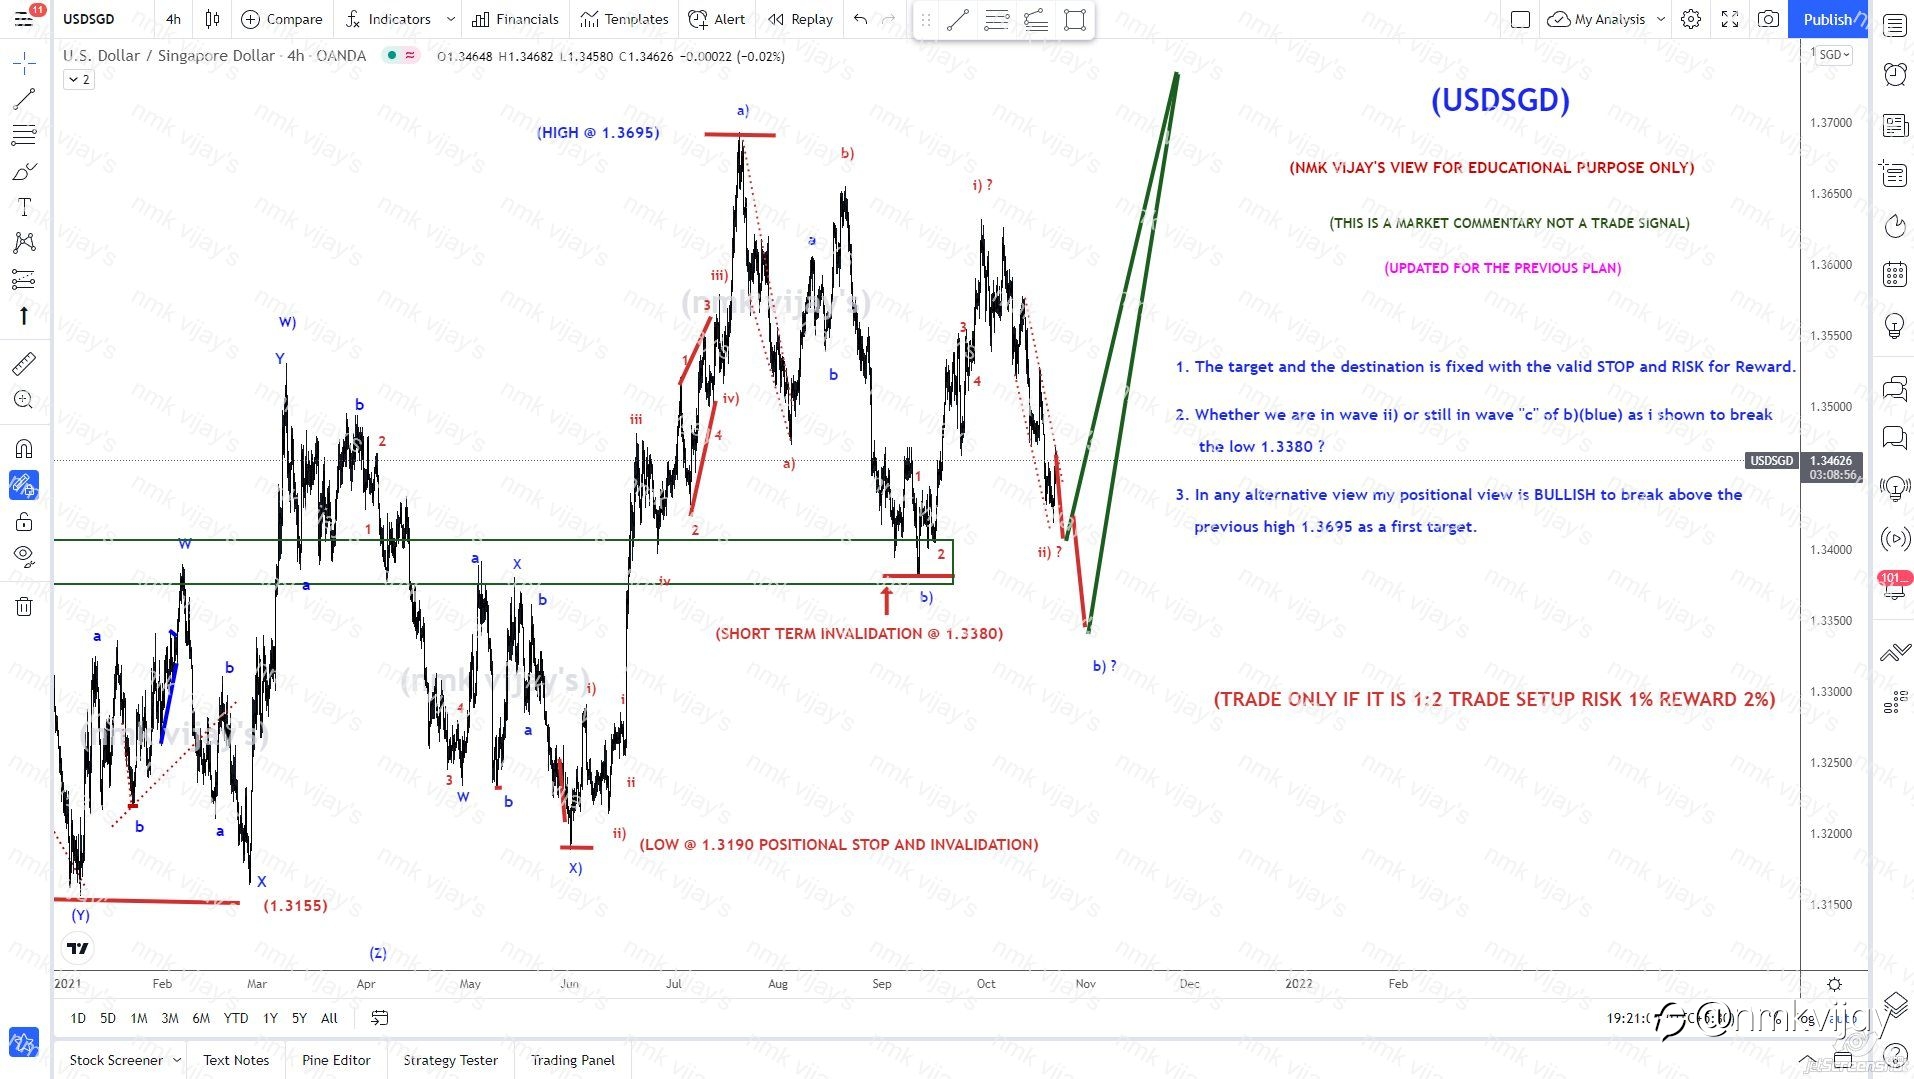 USDSGD- Whether we are in wave ii) or b) yet to confirm for C)